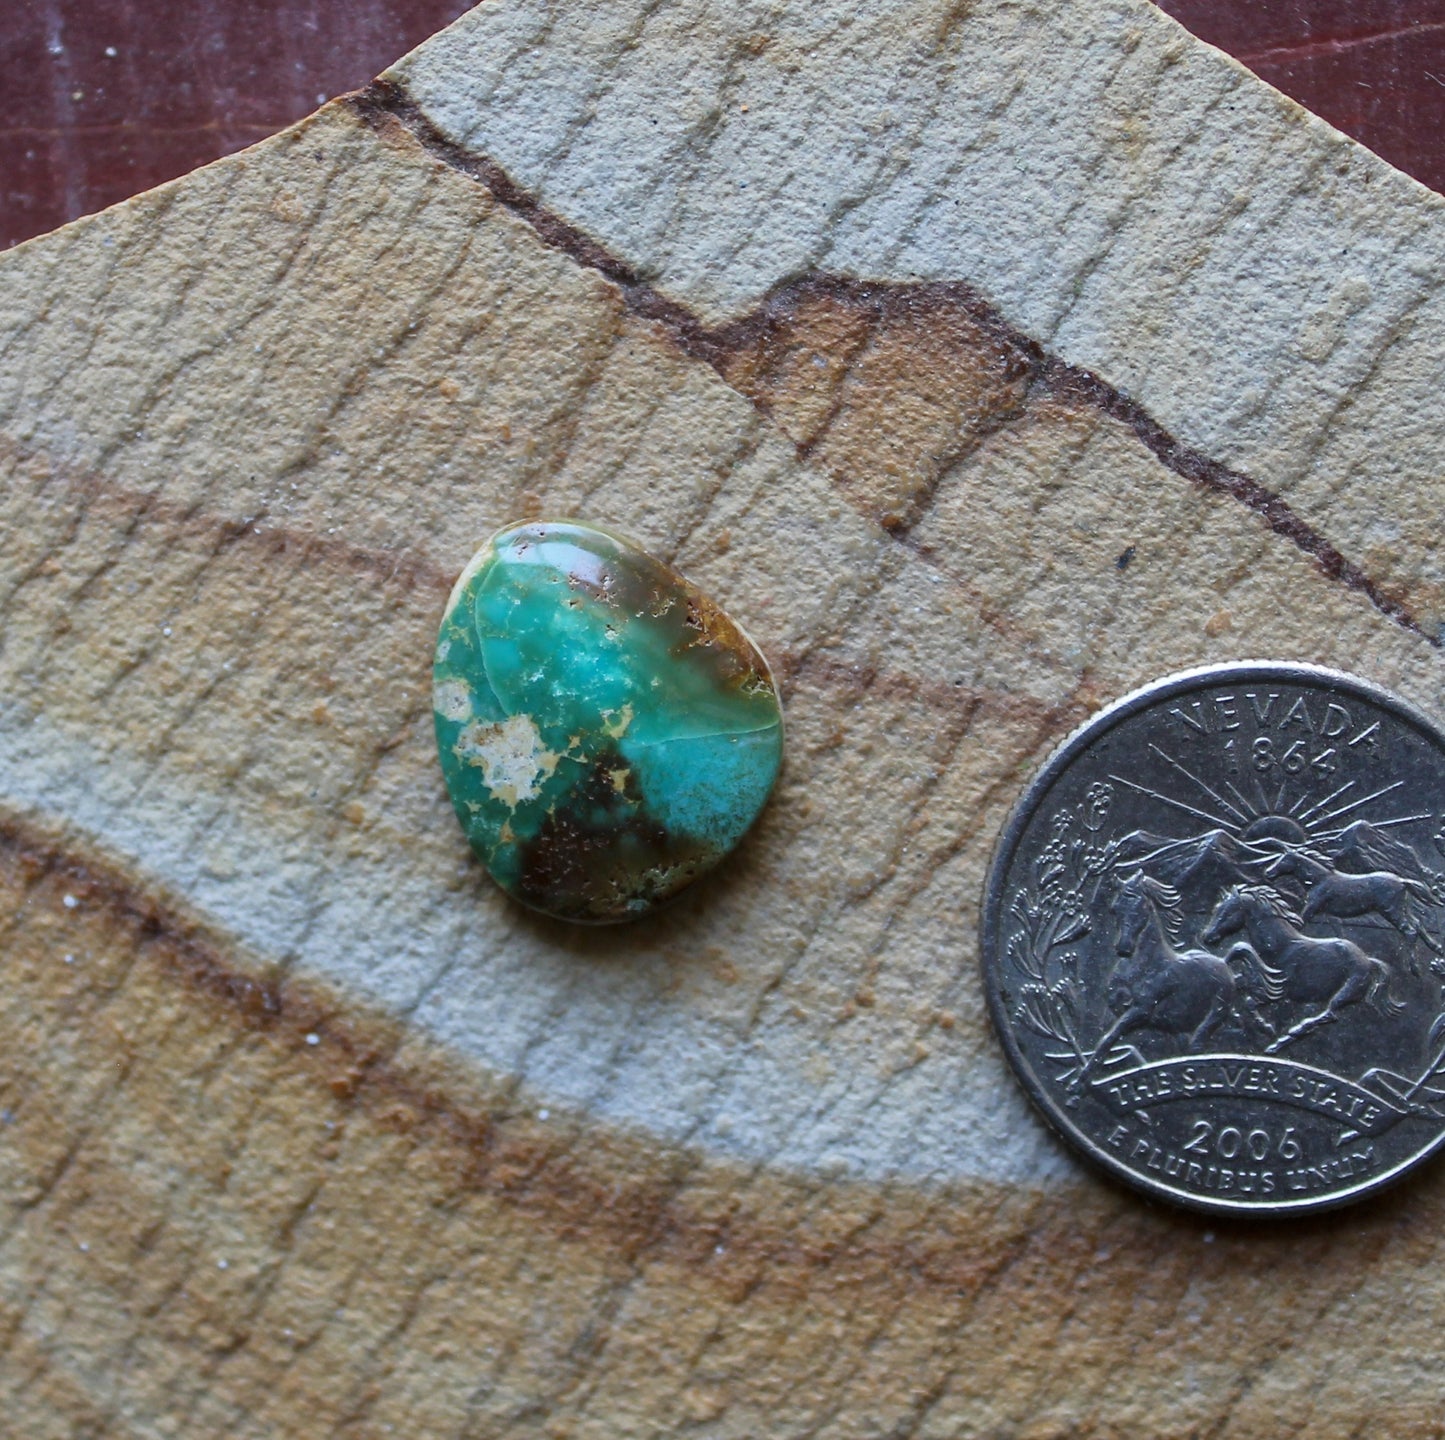 6 carat blue Stone Mountain Turquoise cabochon with red matrix